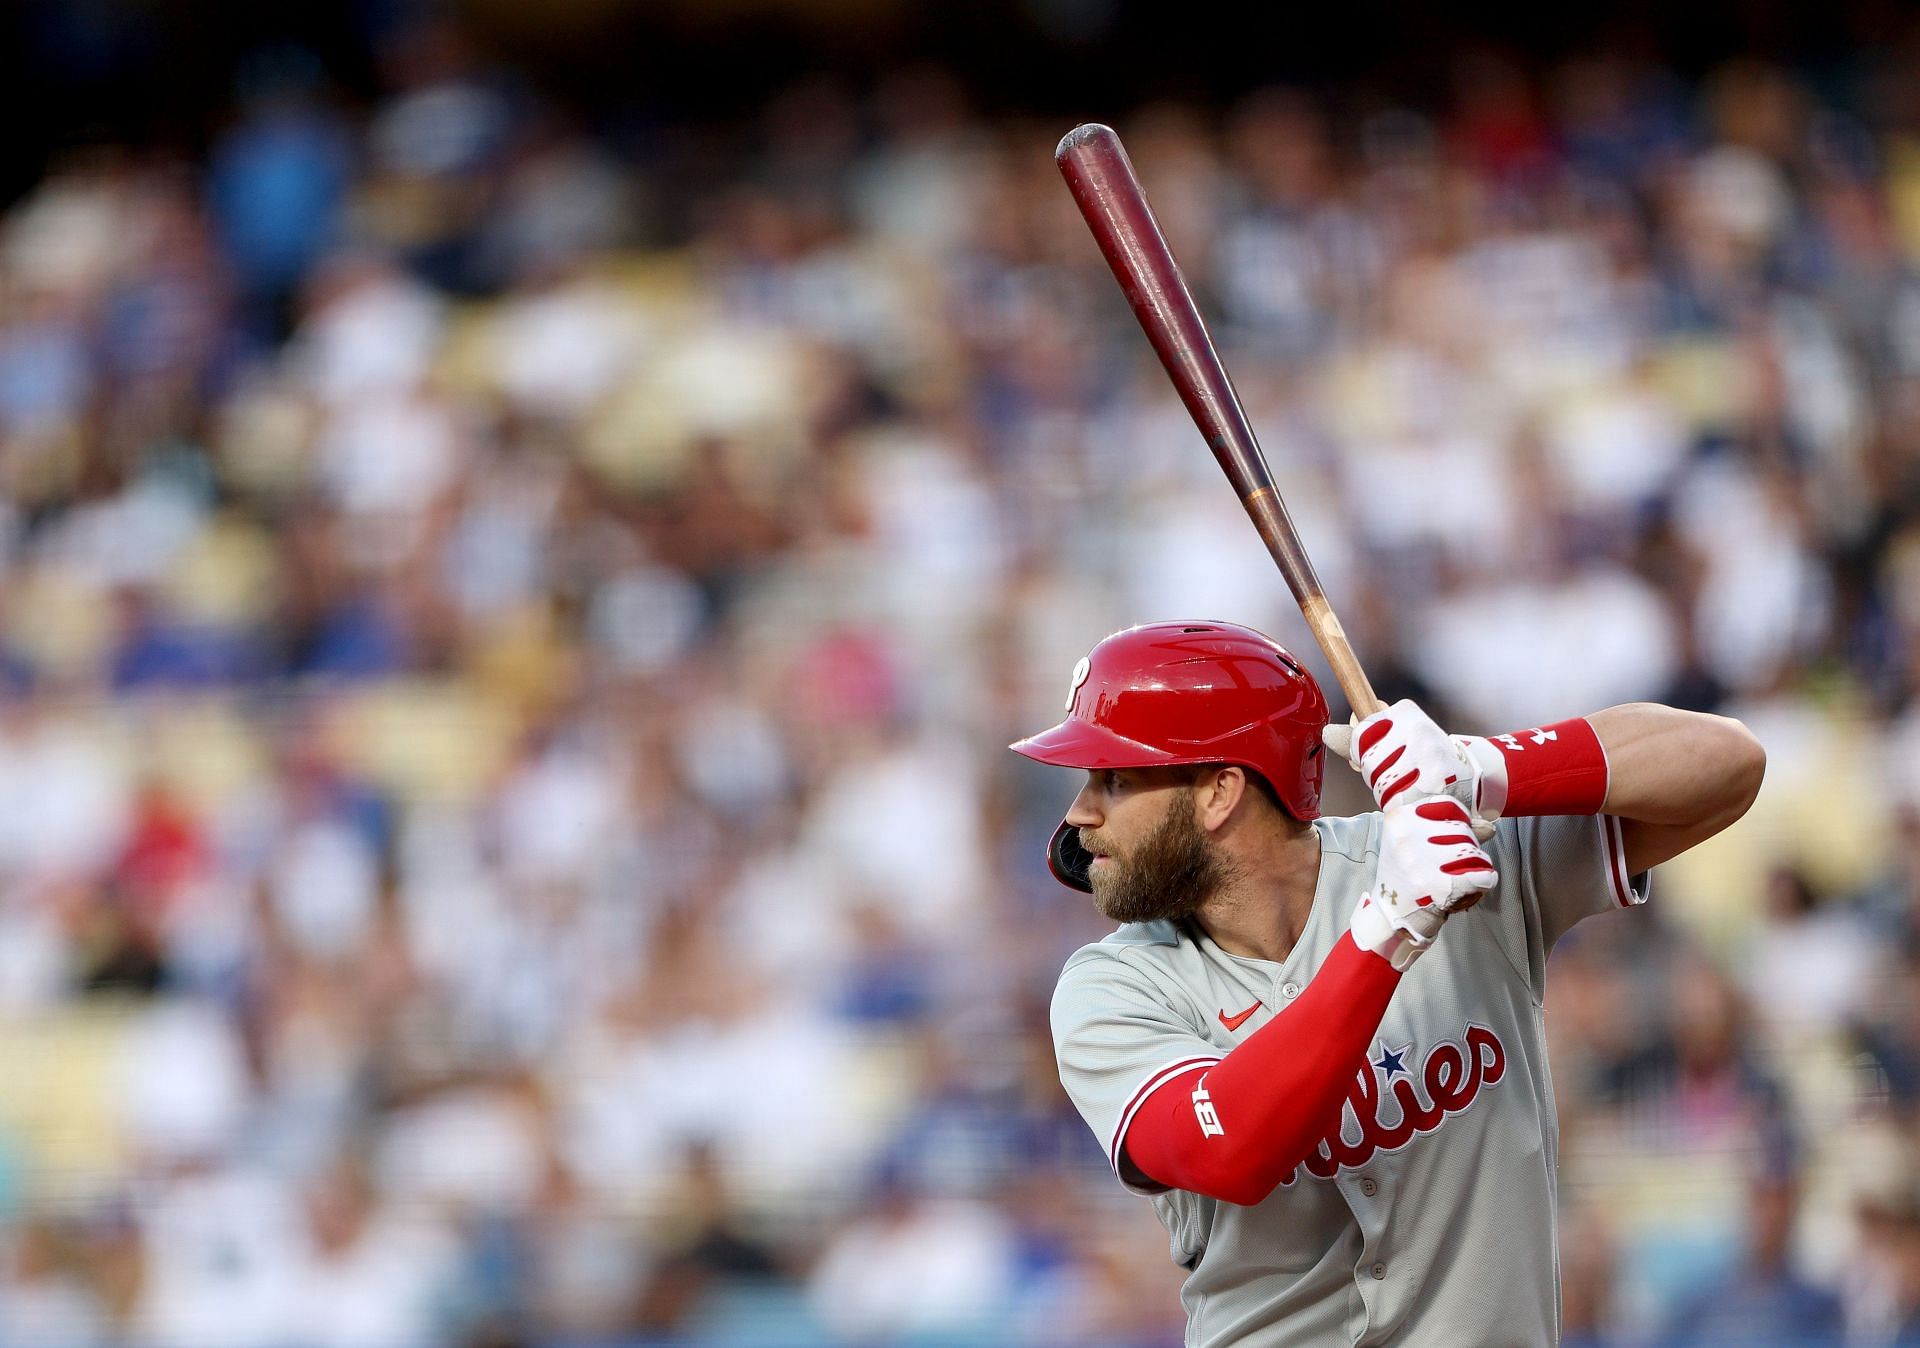 Bryce Harper of the Philadelphia Phillies bats against the Los Angeles Dodgers at Dodger Stadium.